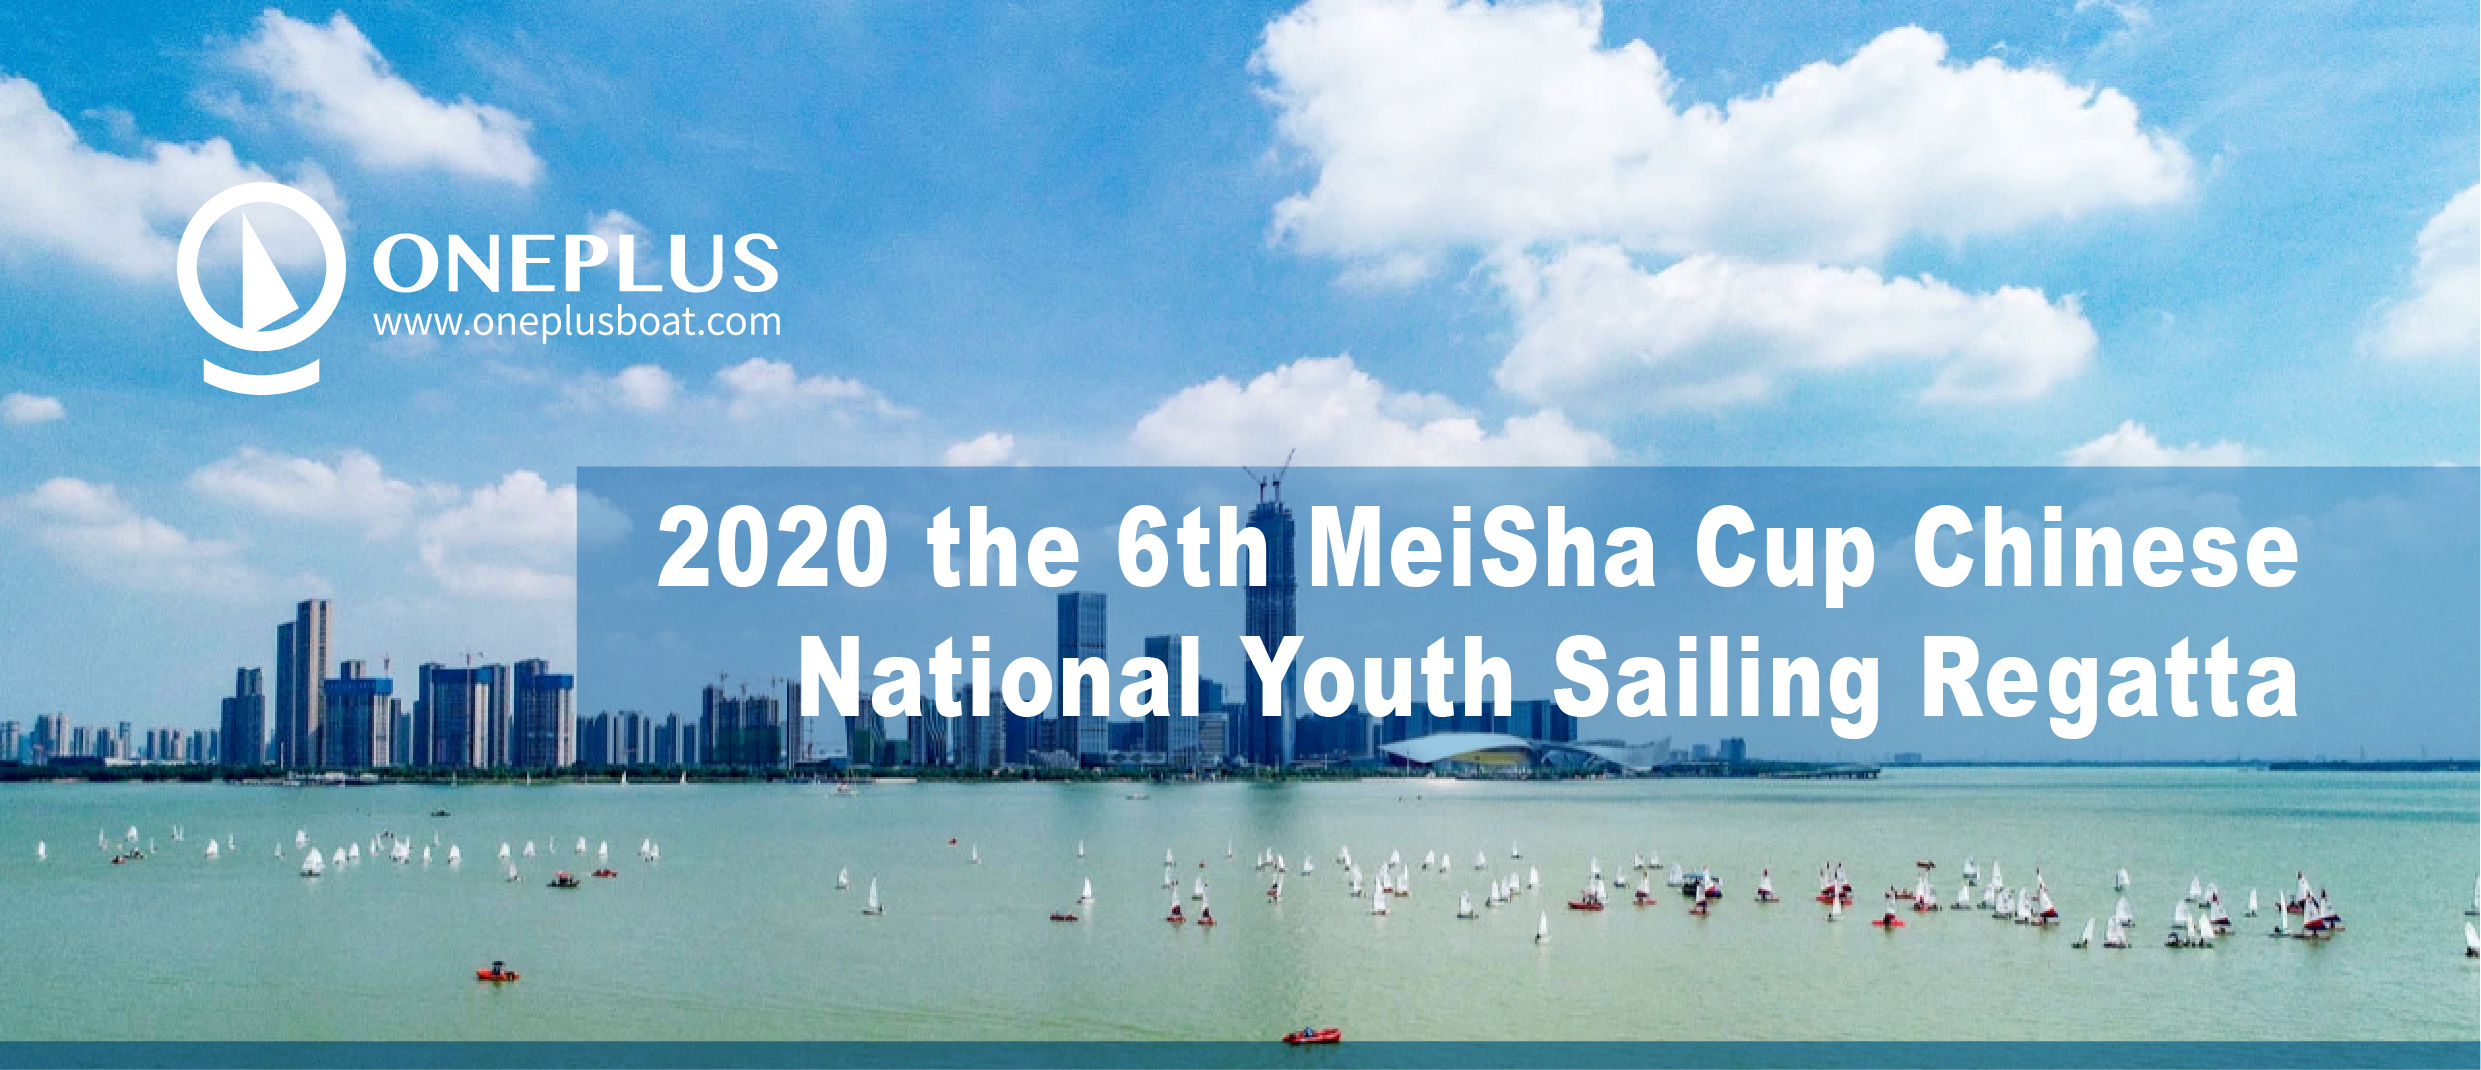 2020 the 6th MeiSha Cup Chinese National Youth Sailing Regatta